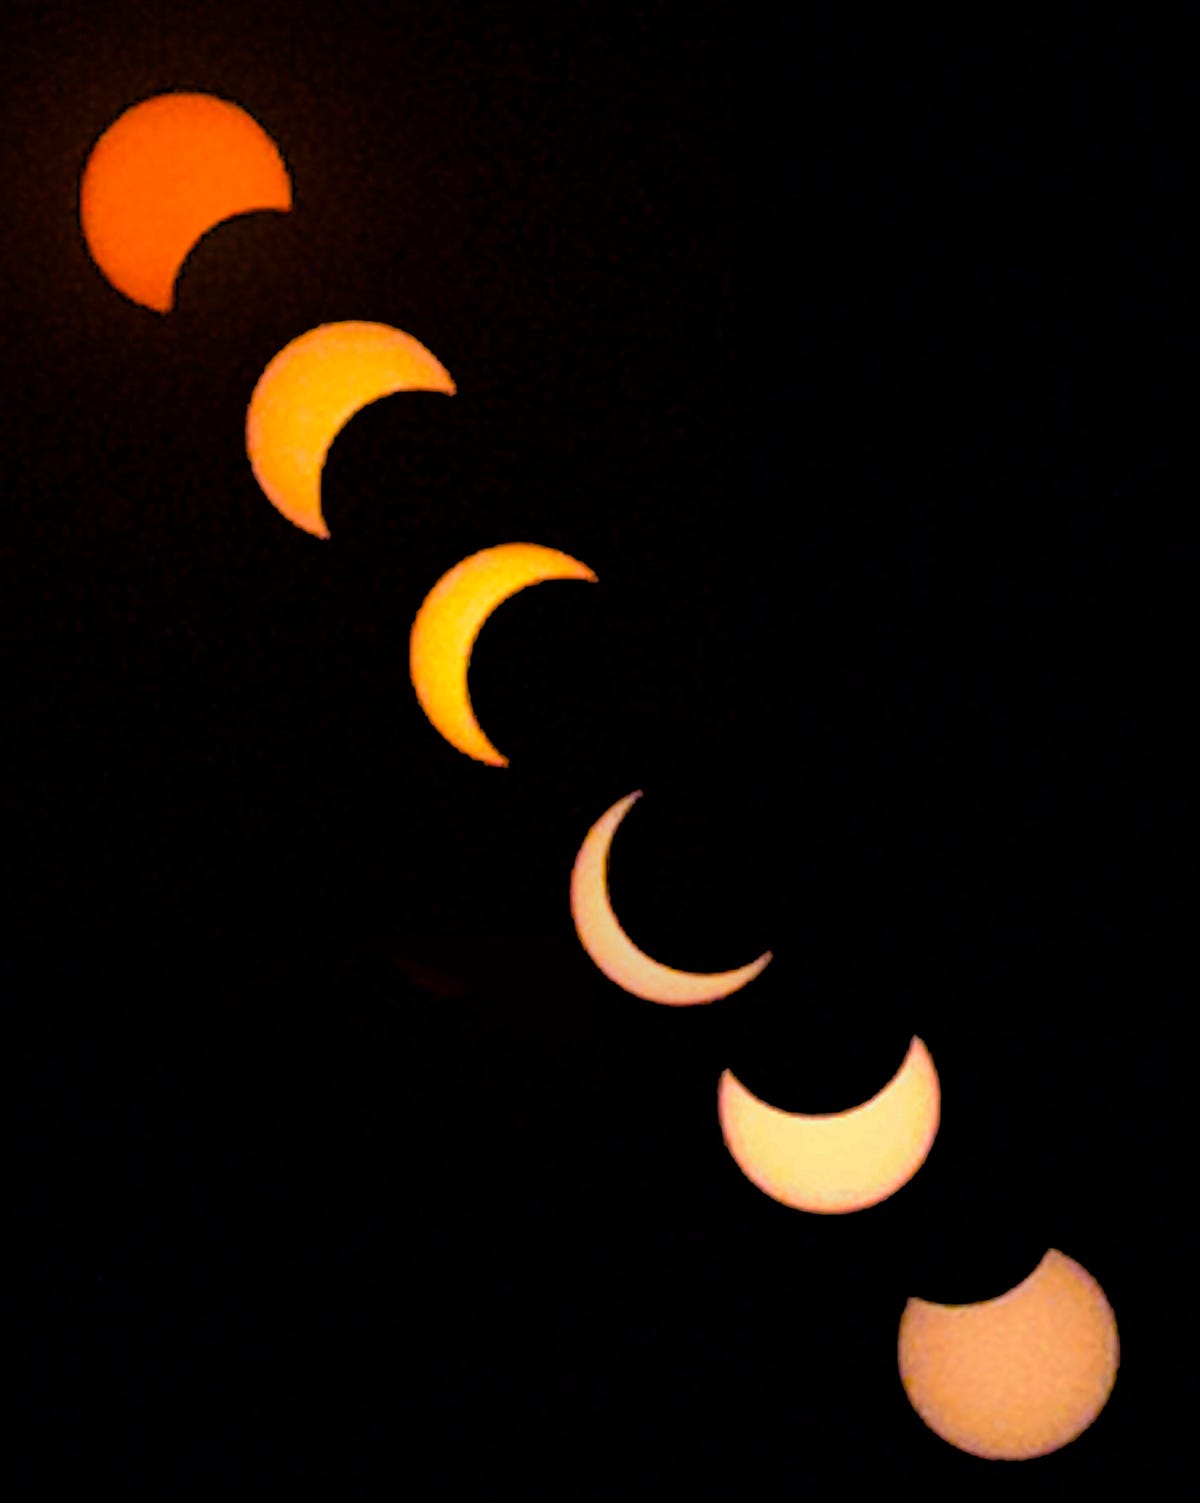 Eclipse photo taken with Solar Snap